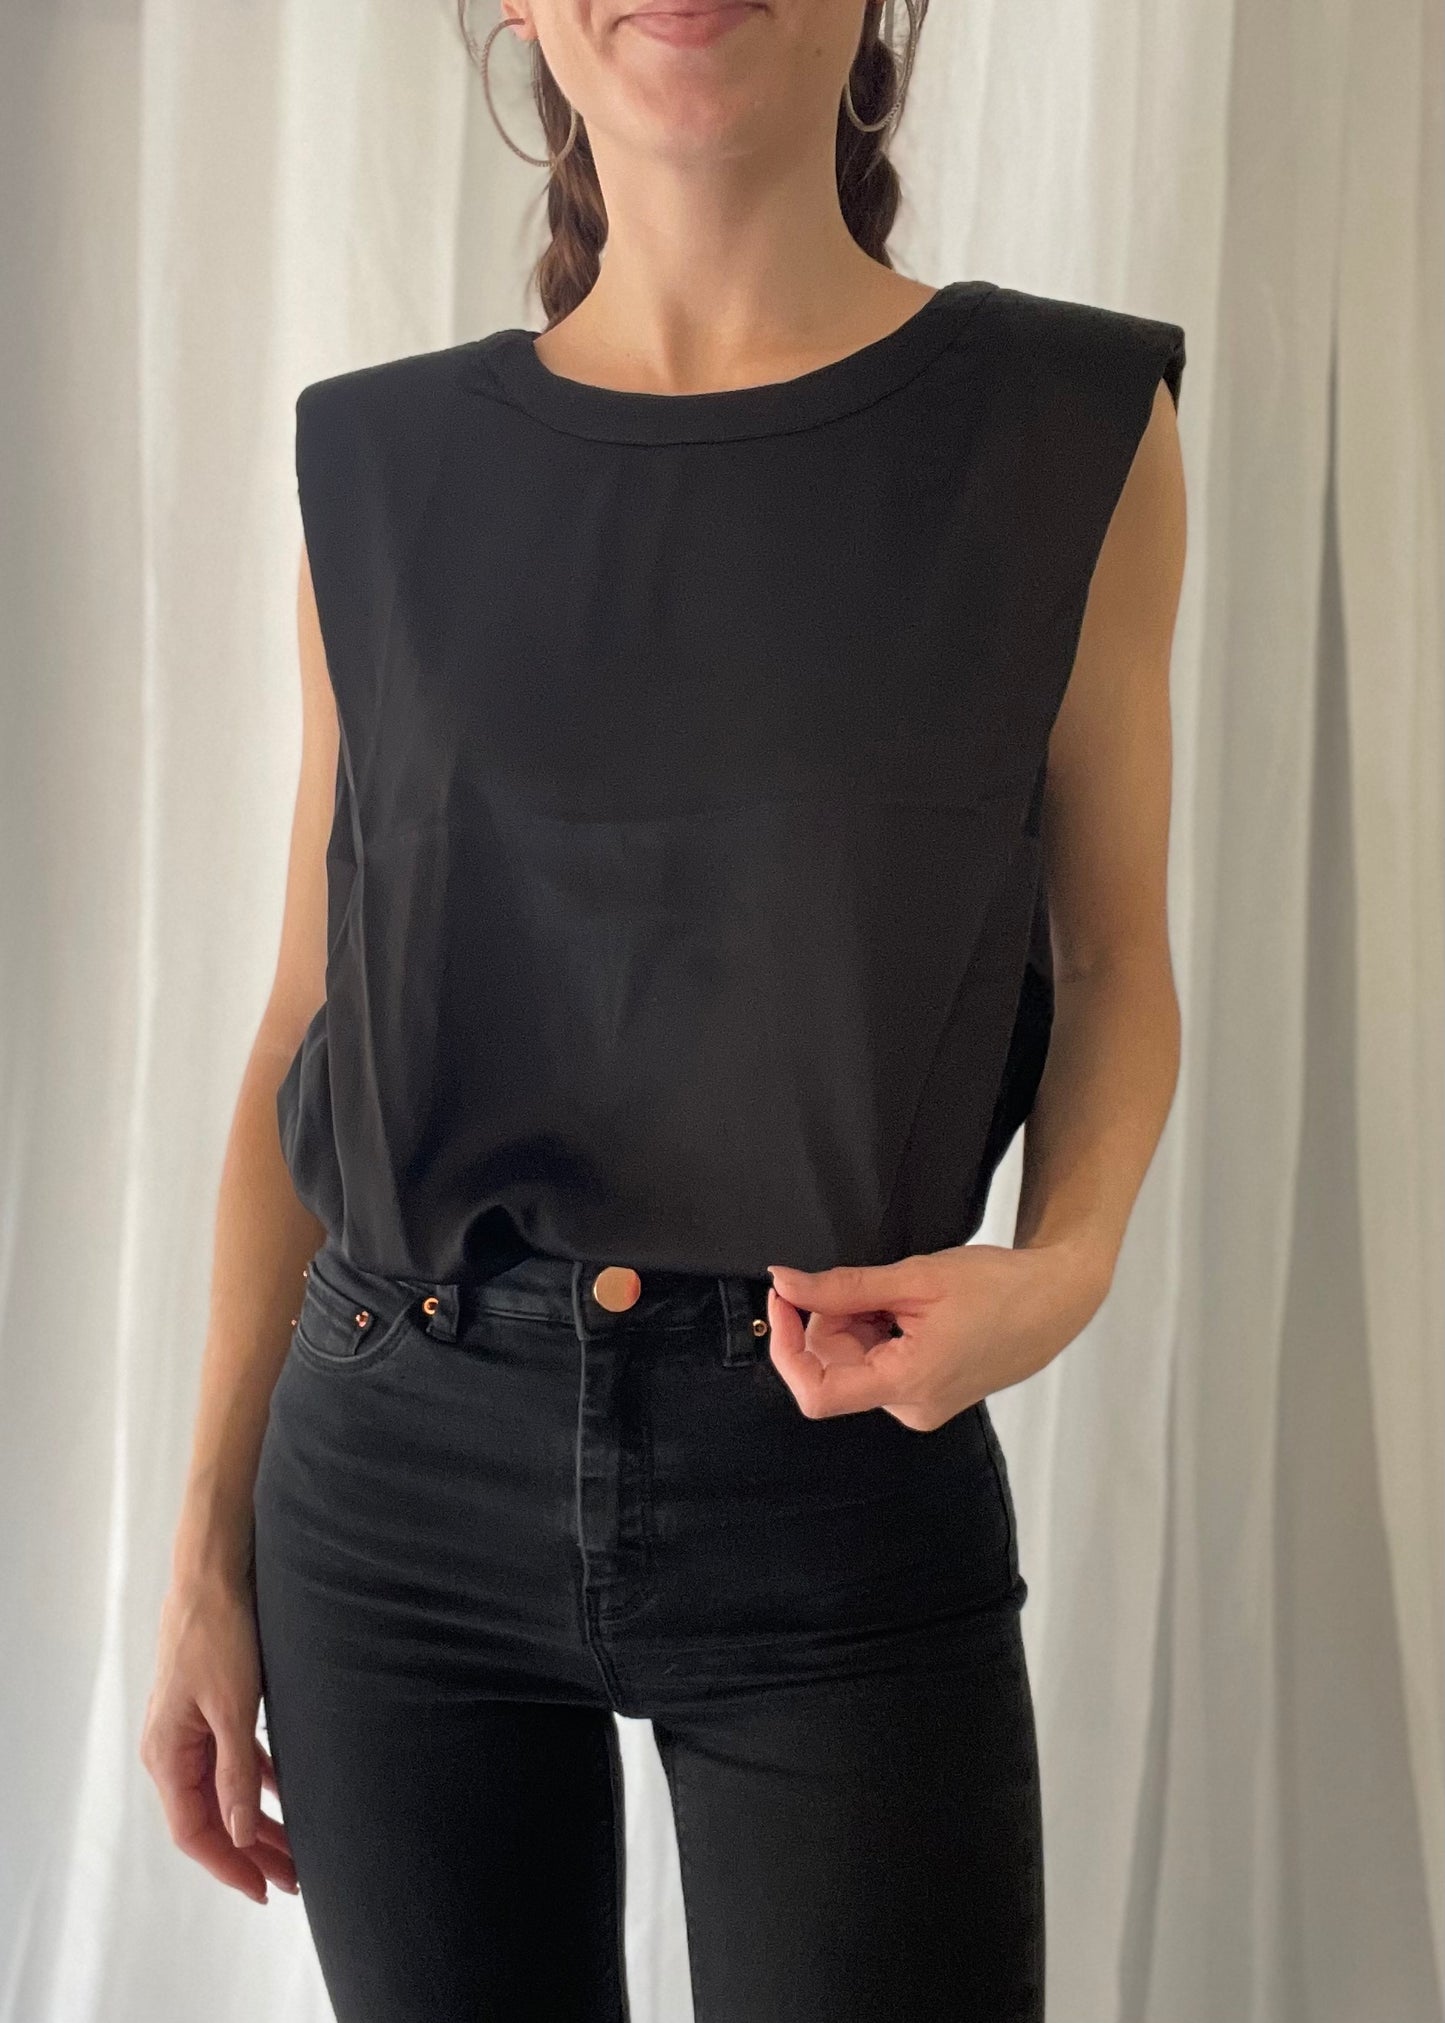 After Hours Black Top